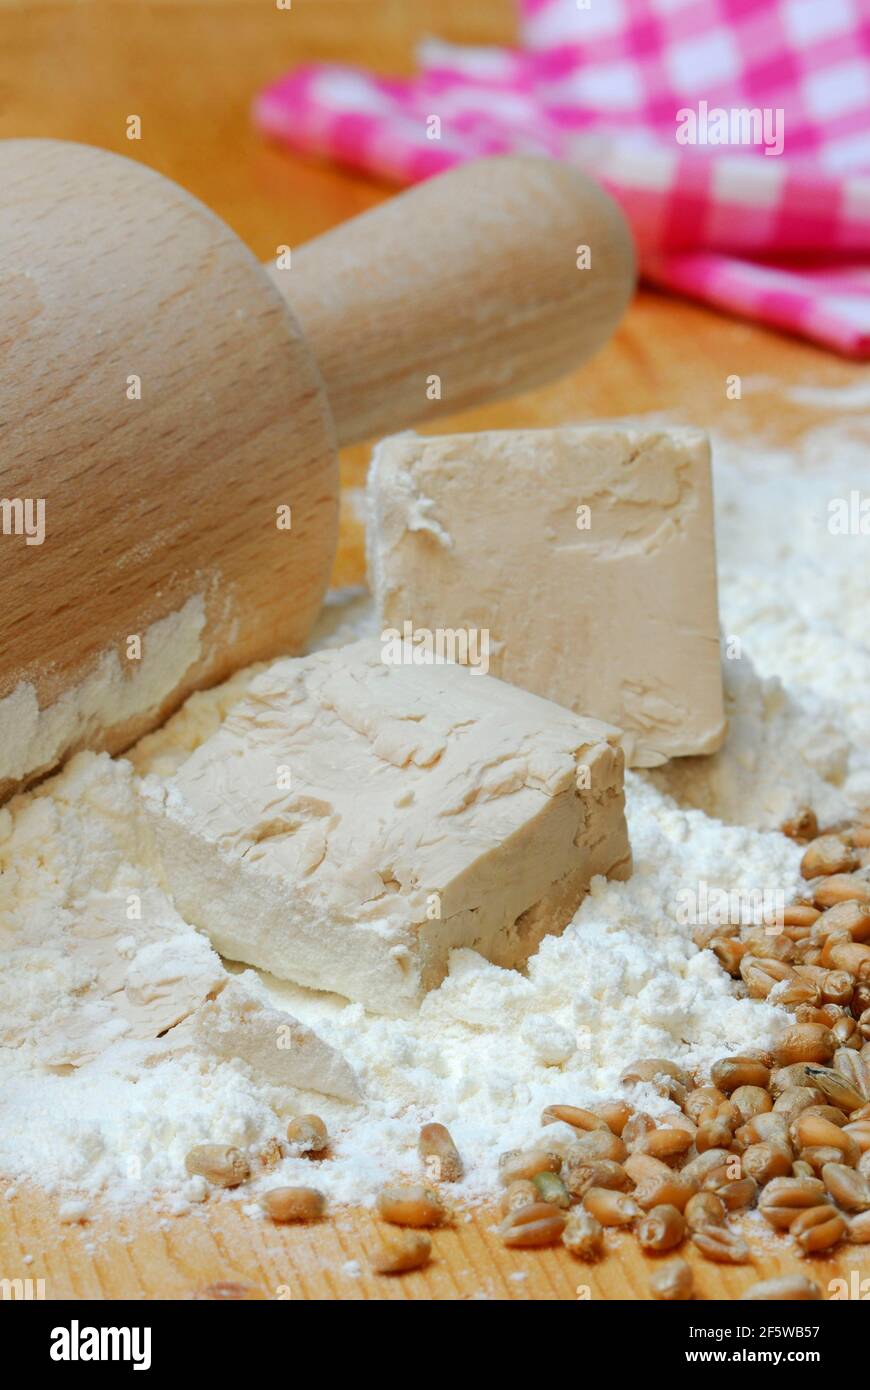 Baker's yeast, yeast, yeast cubes and wheat flour, wheat grains, flour, baking ingredient, baking agent, dry yeast Stock Photo